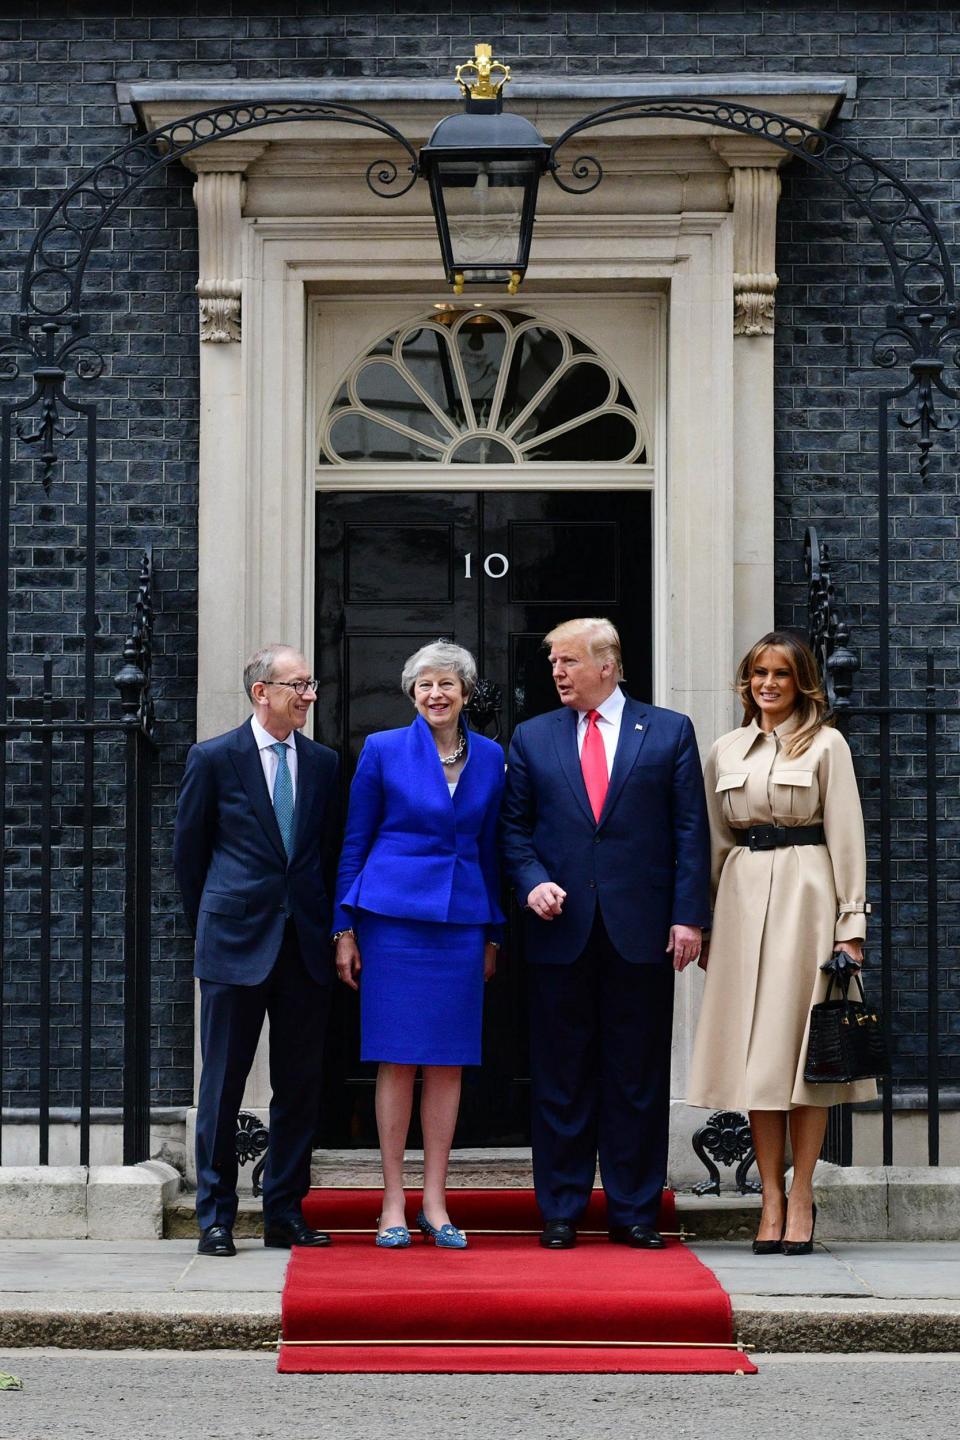 Melania Trump rewears old Celine trench coat for Downing Street visit